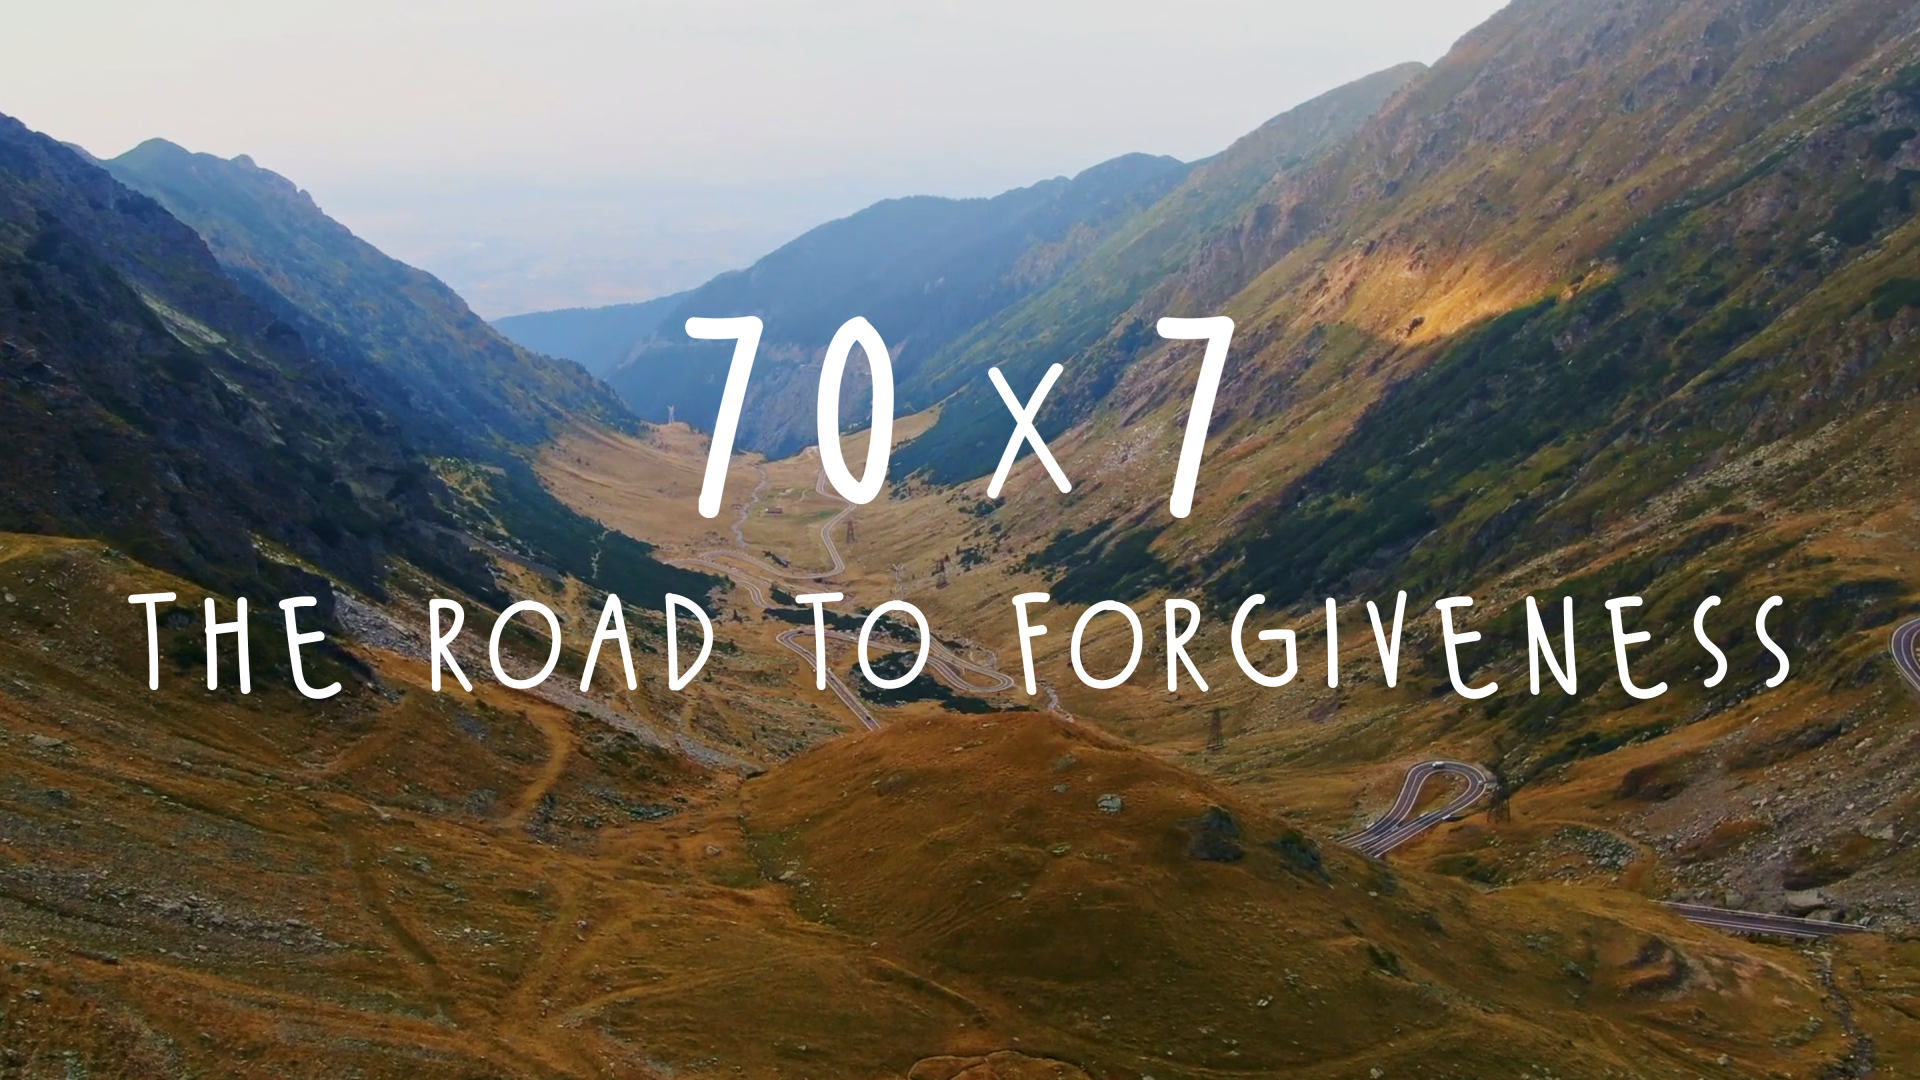 How to Forgive When We’ve Been Hurt